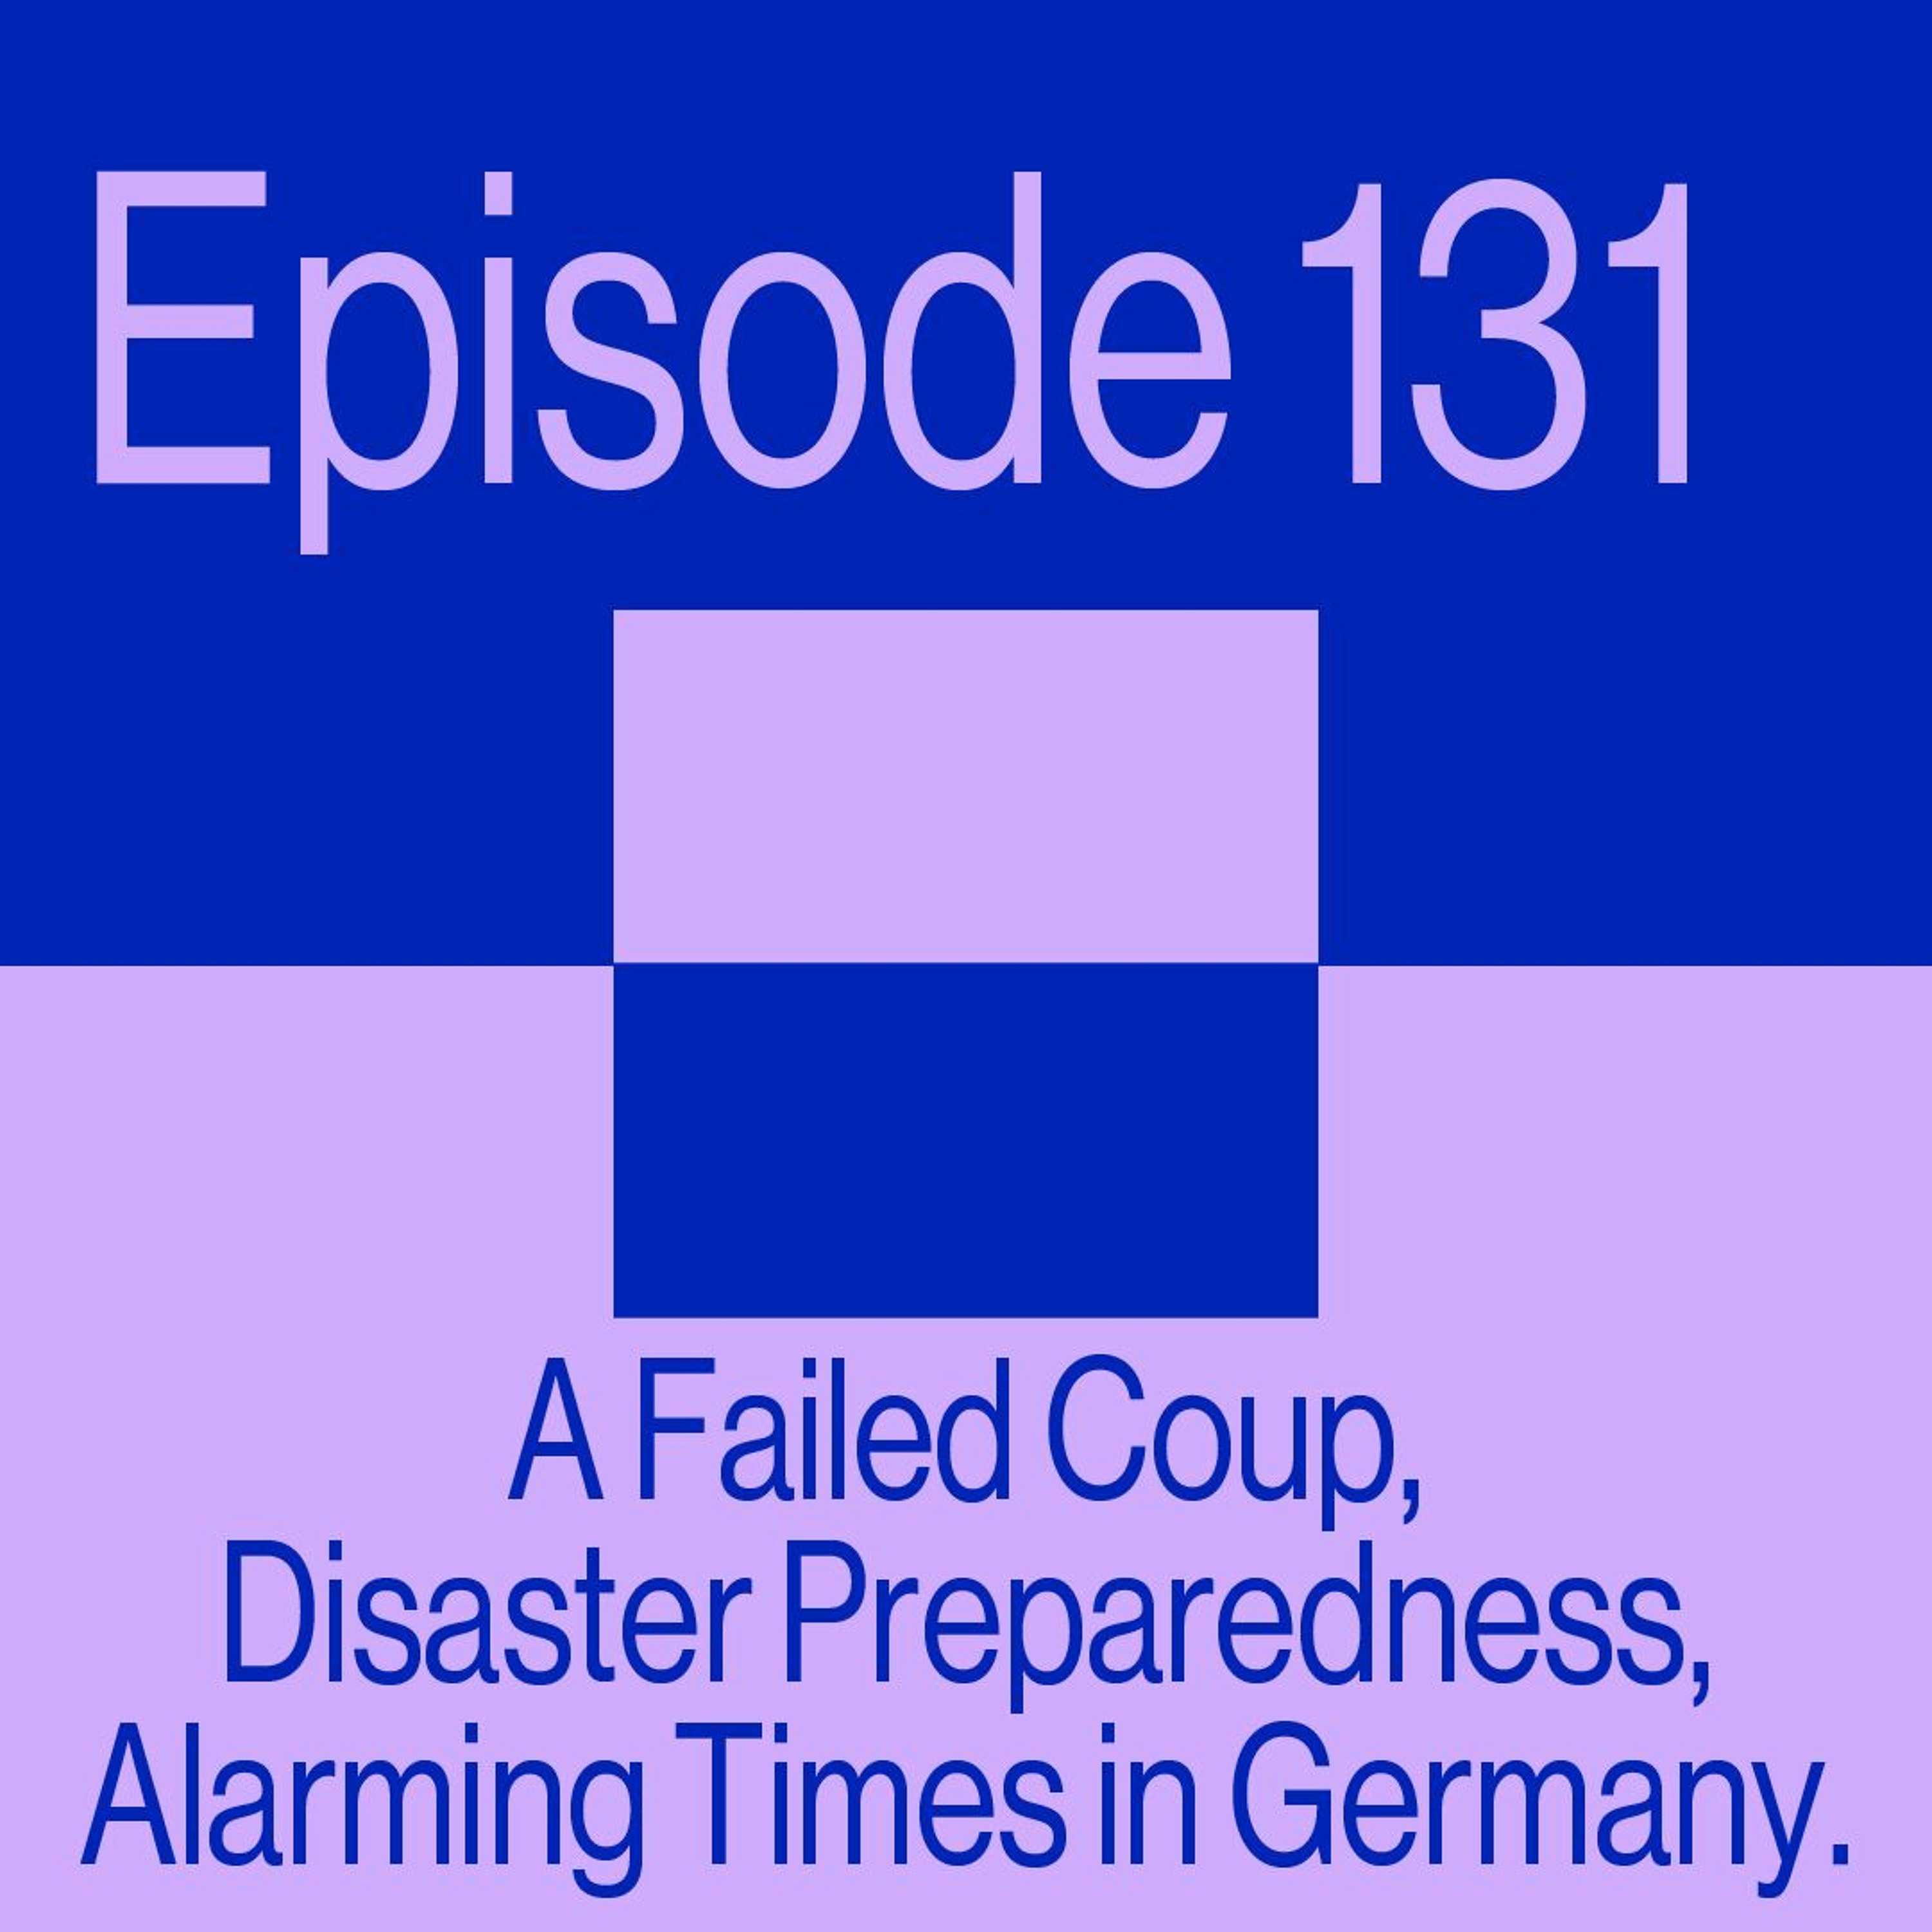 Episode 131: A Failed Coup, Disaster Preparedness and Alarming Times in Germany